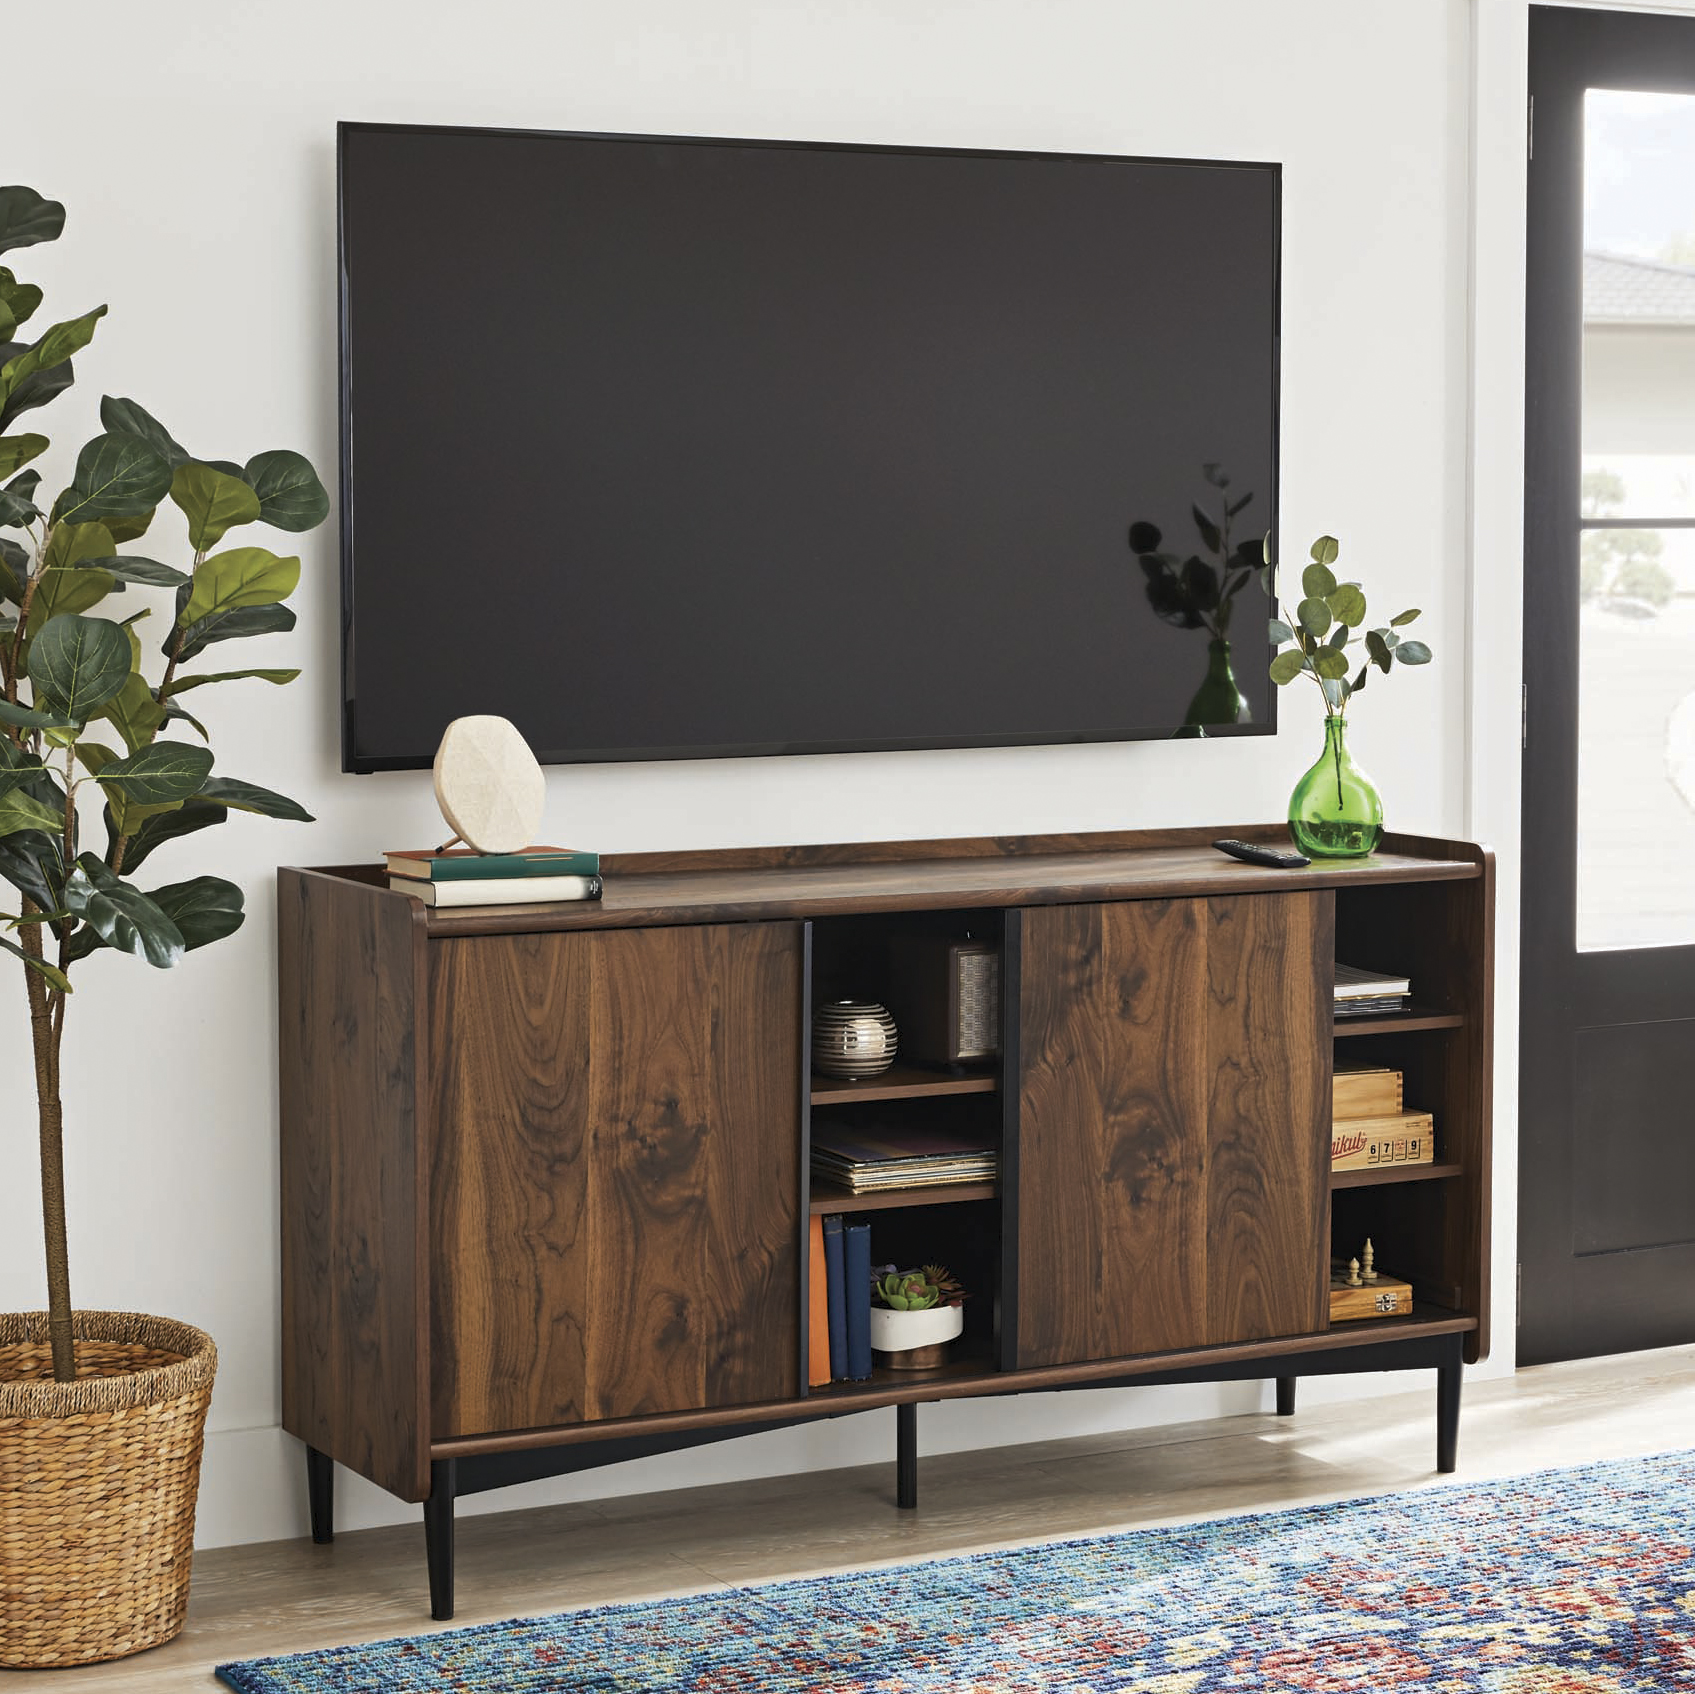 Better Homes & Gardens Montclair TV Stand Storage Console for TVs up to 65", Vintage Walnut Finish - image 4 of 7